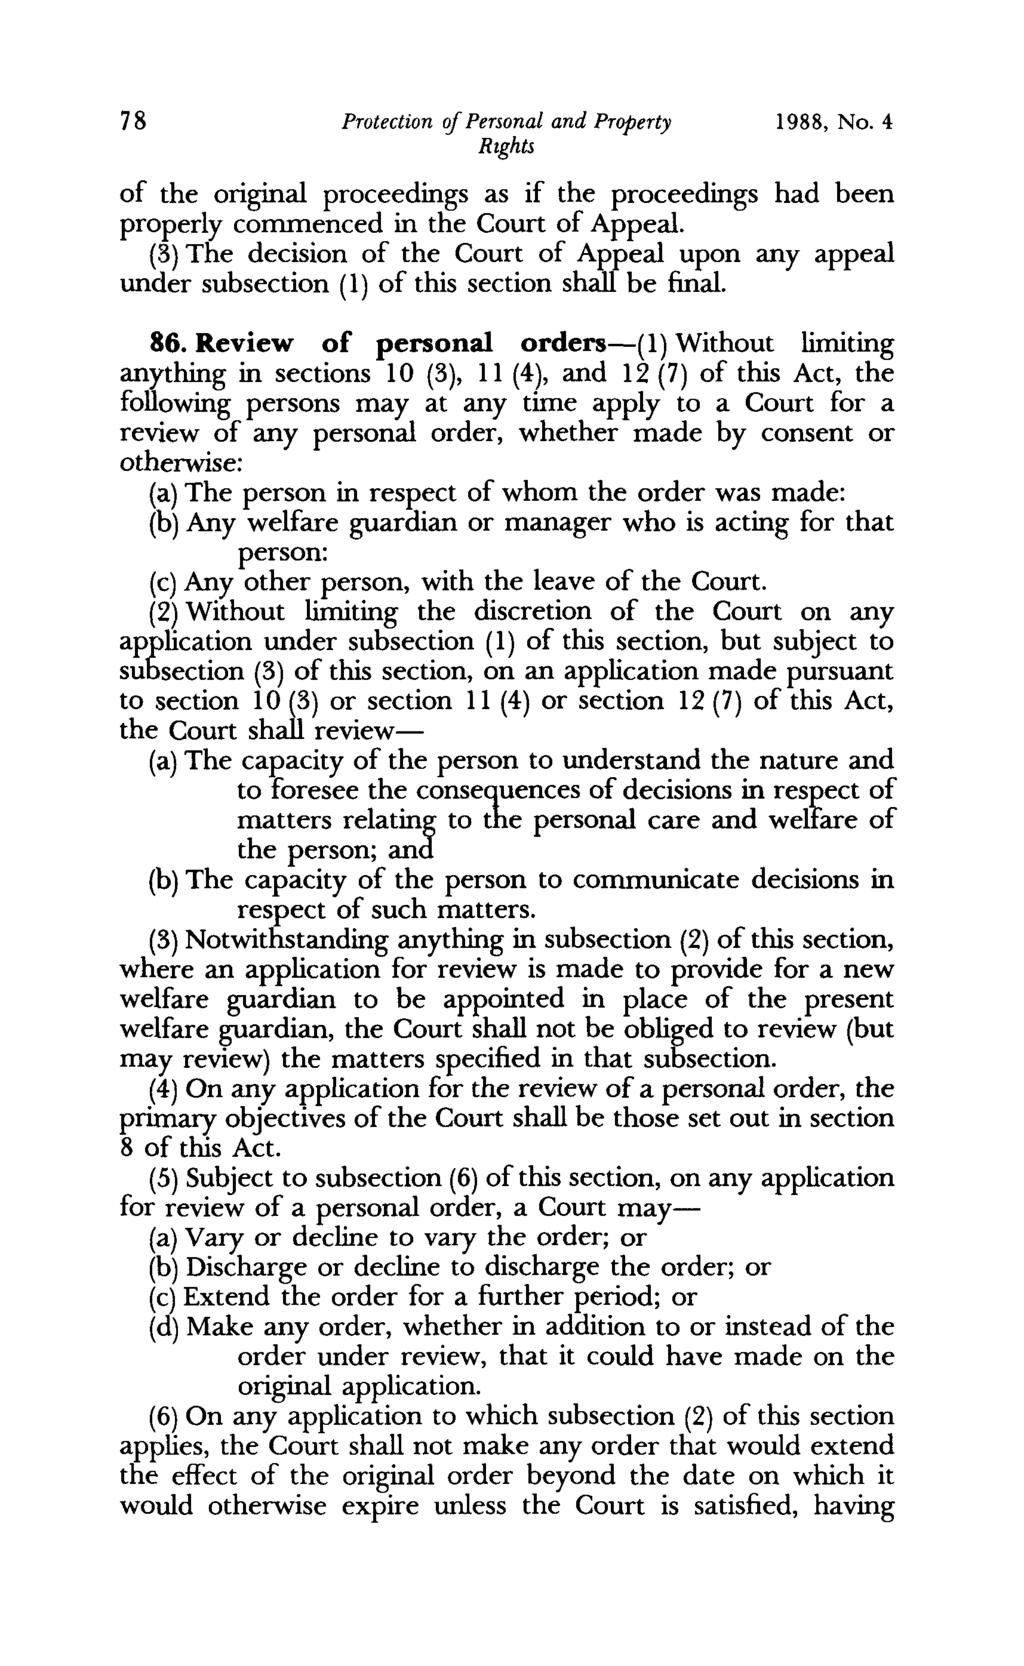 78 Protection of Personal and Property RIghts 1988, No. 4 of the original proceedings as if the proceedings had been properly commenced in the Court of Appeal.